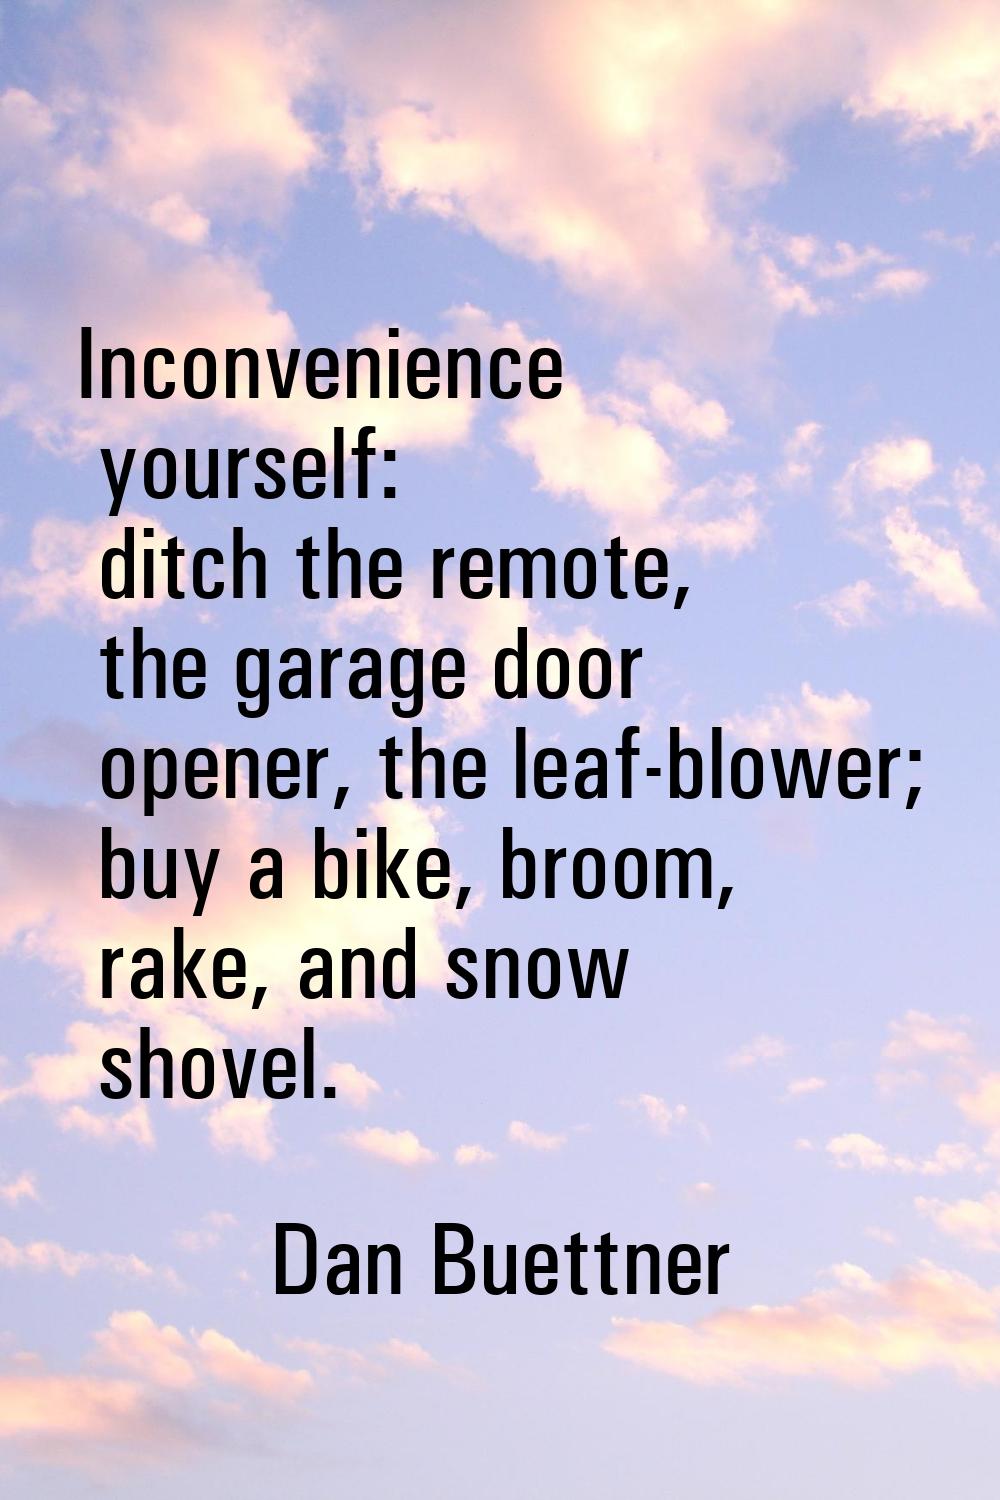 Inconvenience yourself: ditch the remote, the garage door opener, the leaf-blower; buy a bike, broo